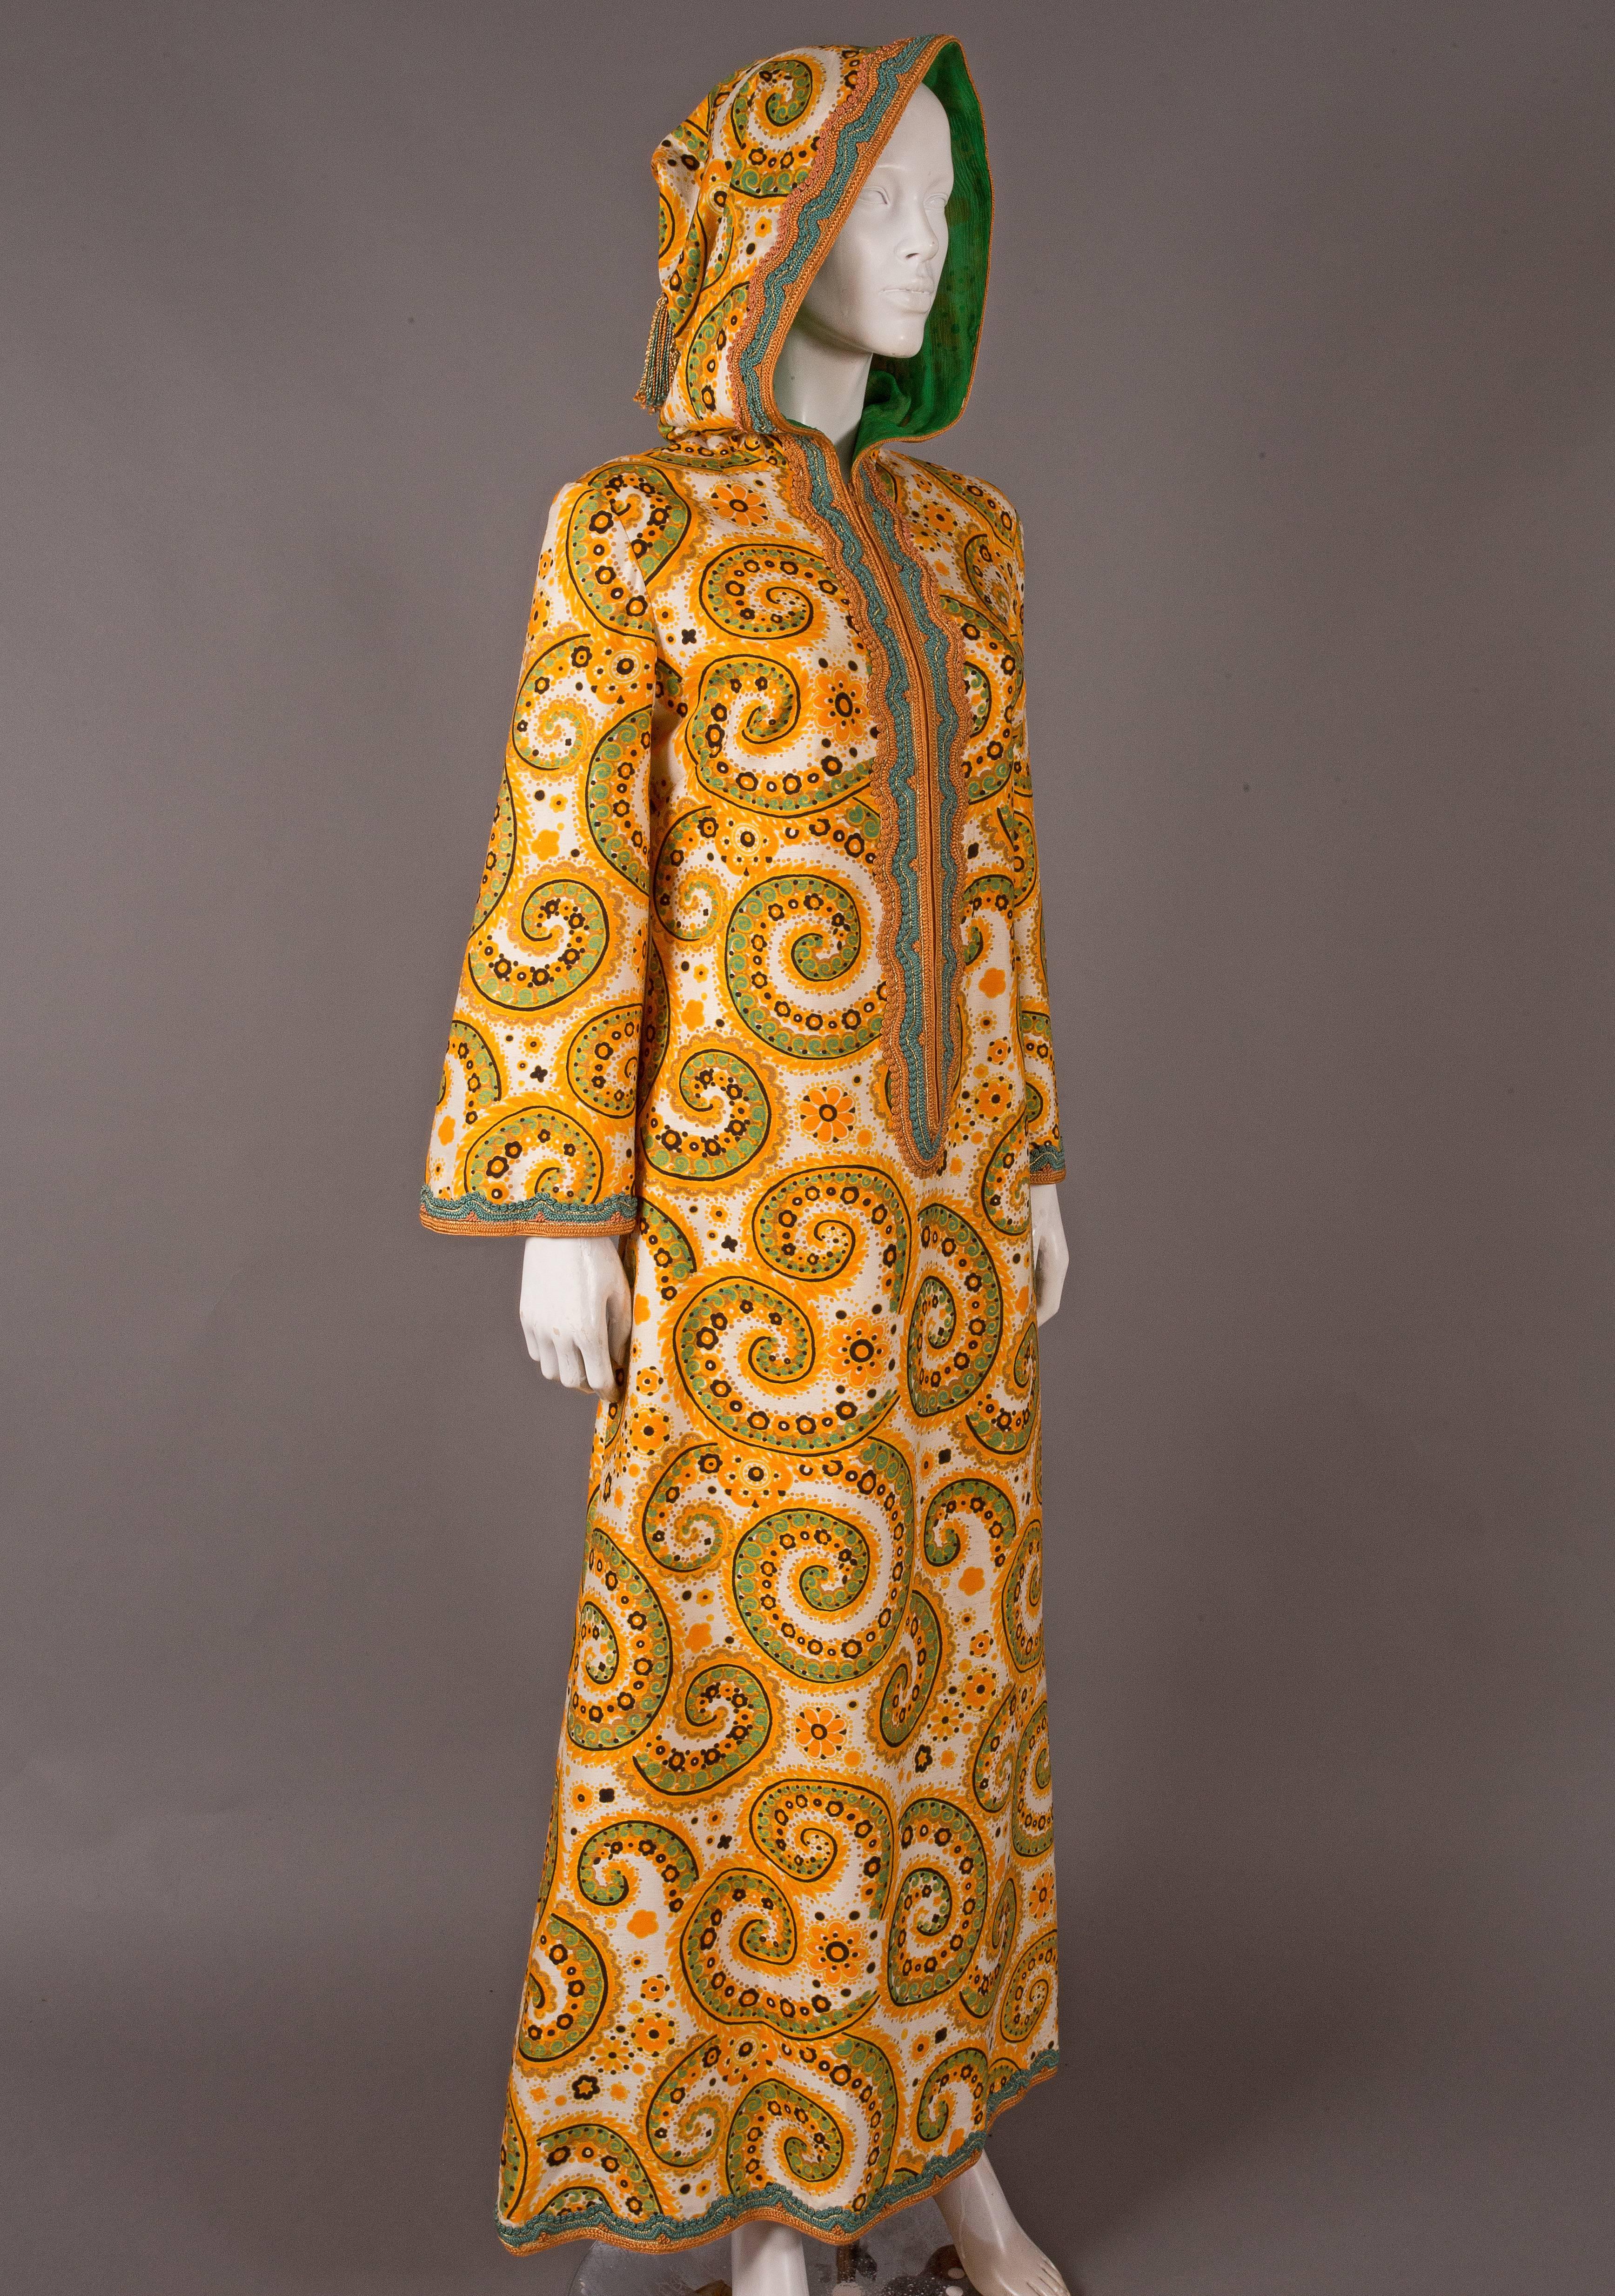 Rare Thea Porter Couture hooded raw silk caftan, circa 1970s. The caftan features hand embroidery throughout, silk chiffon lining in hood, tasseled hood and zip closure. 

Medium